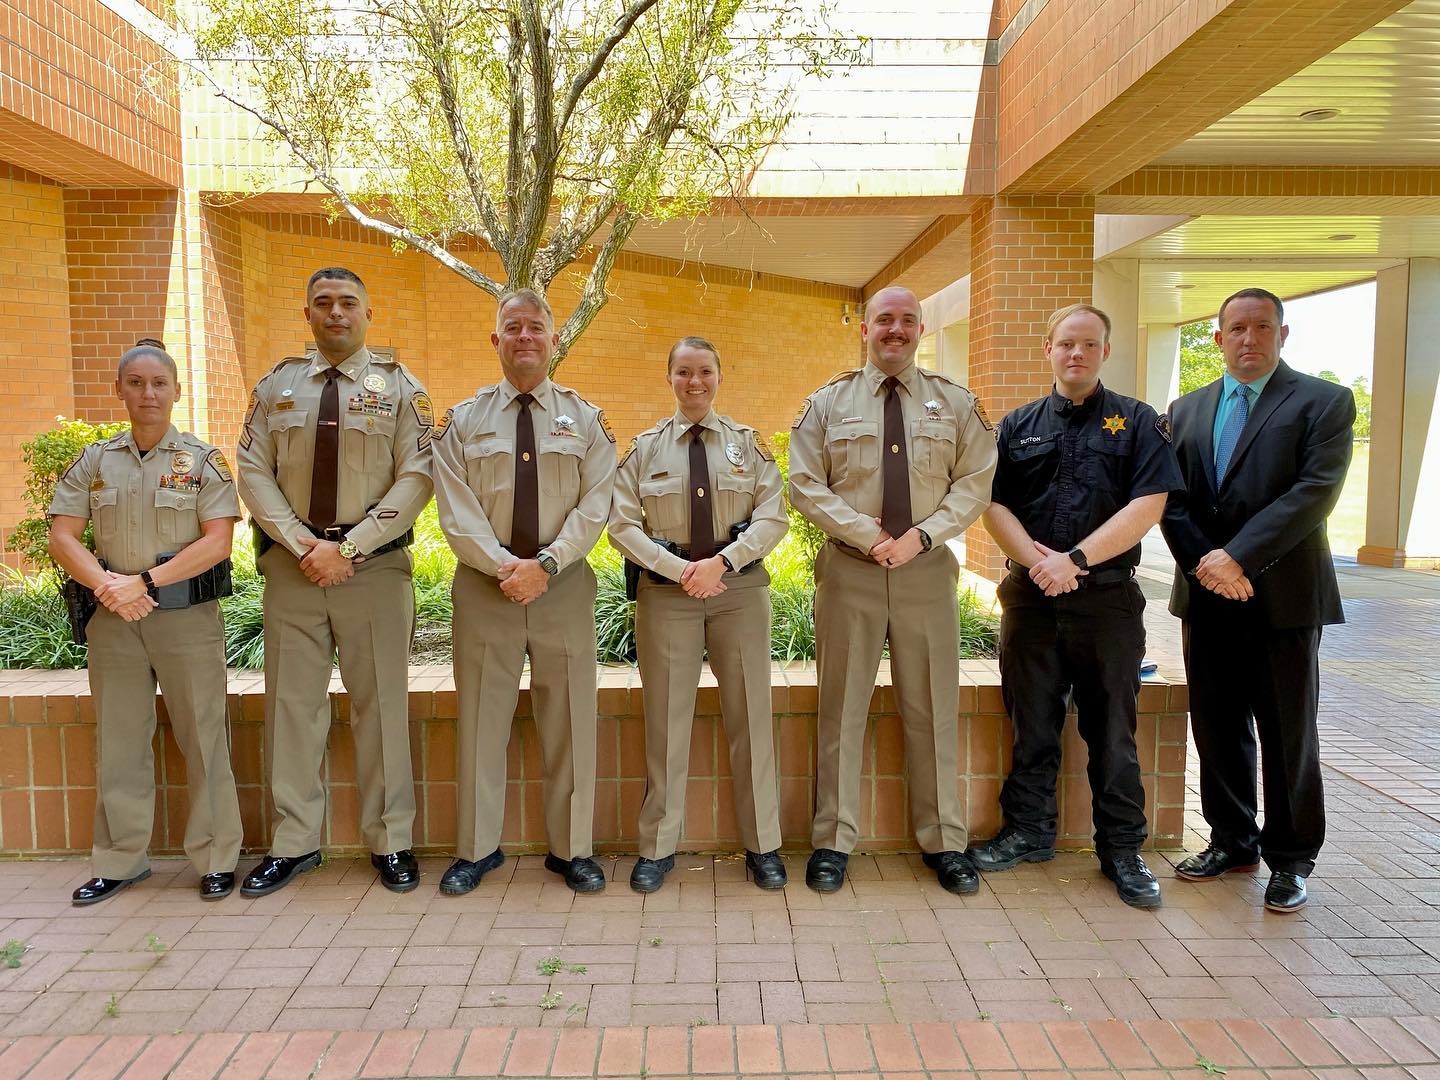 cfcc-detention-officer-graduates-exceed-state-standards-economic-and-workforce-development